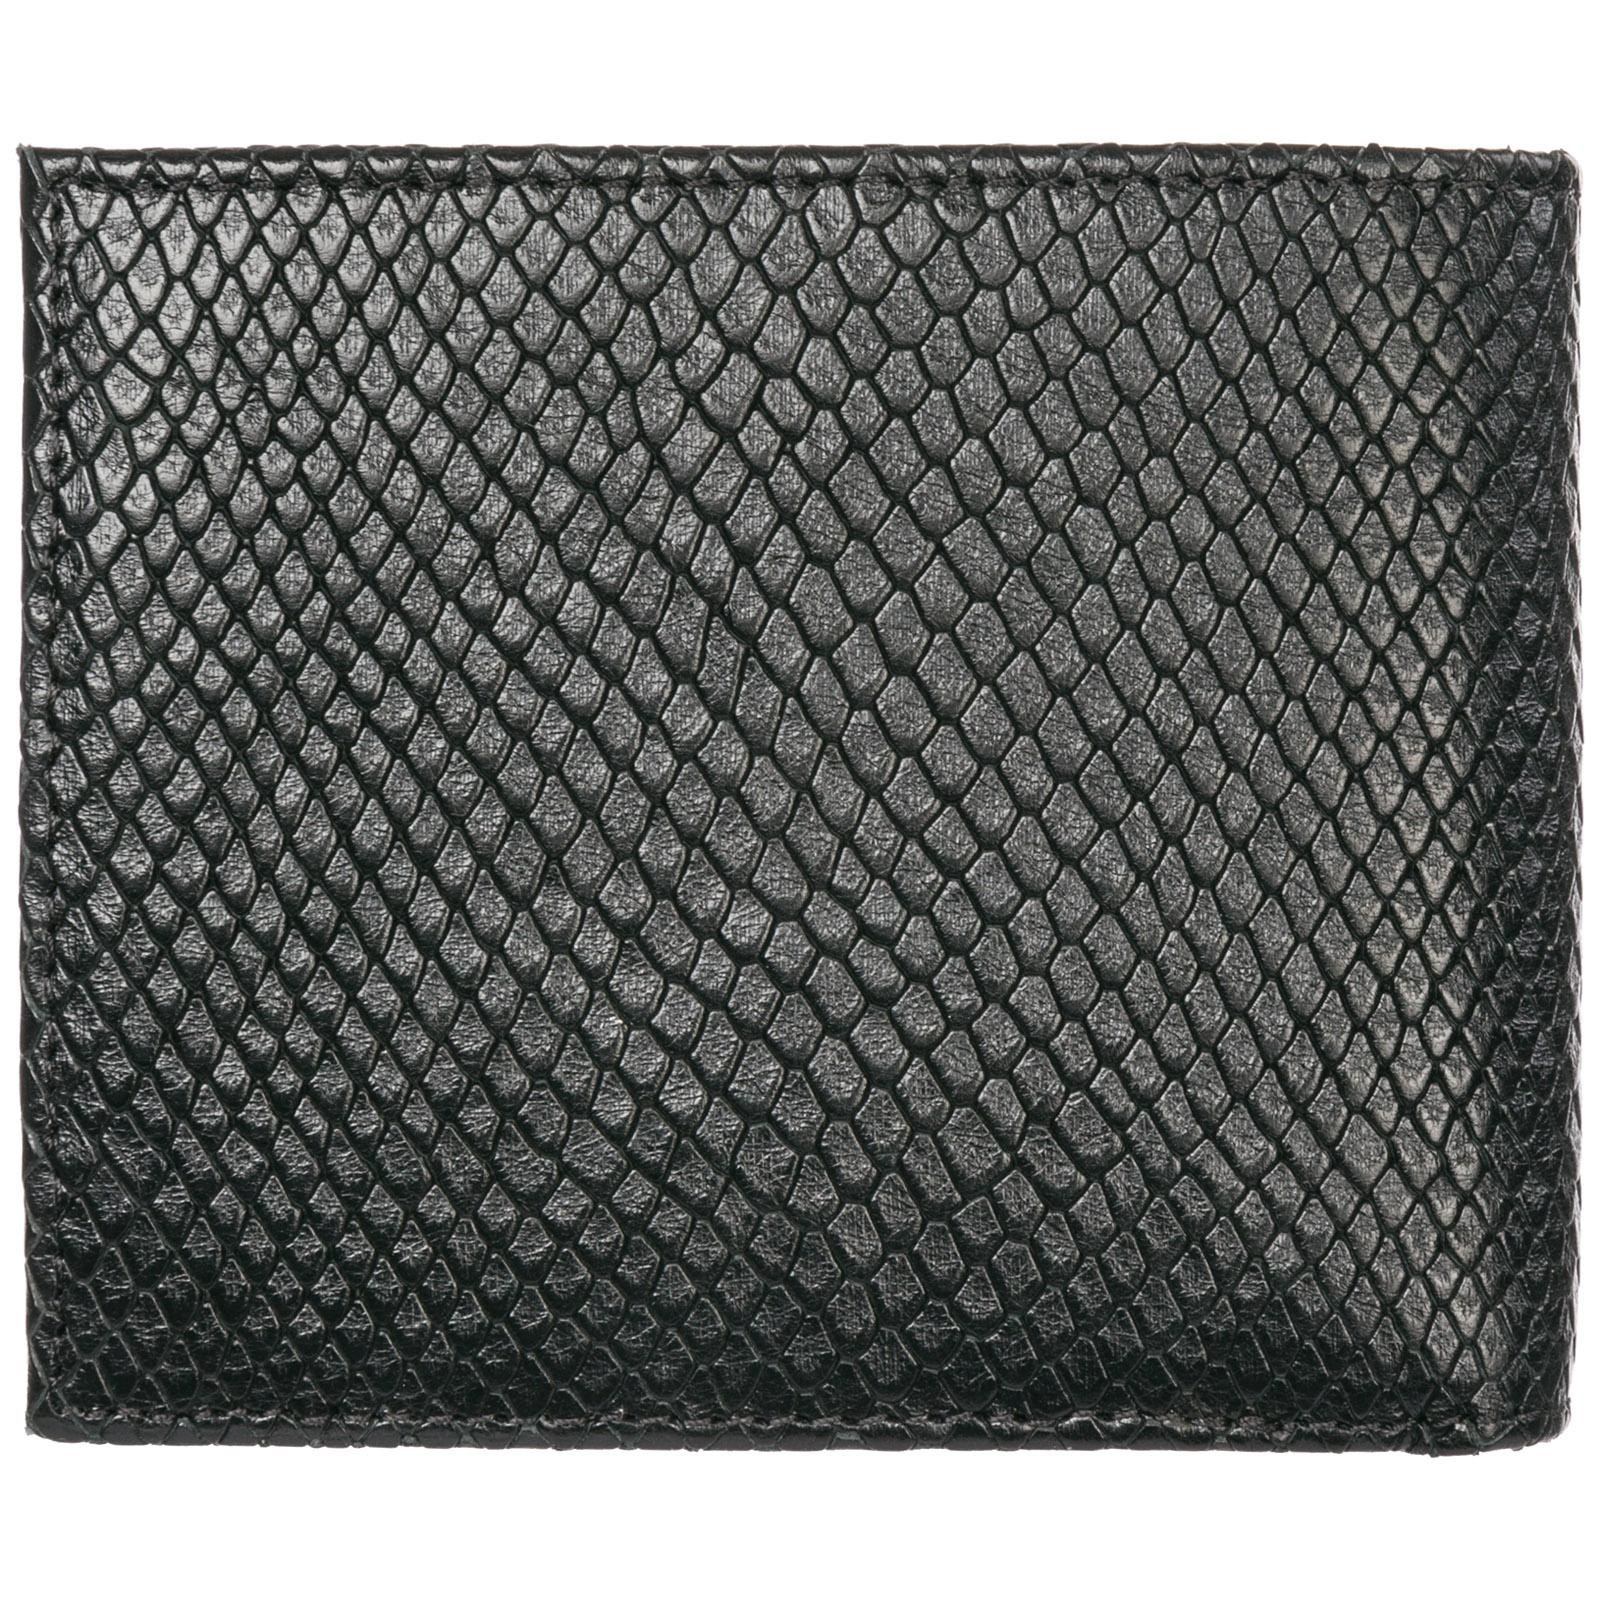 Emporio Armani Wallet Genuine Leather Coin Case Holder Purse Card Bifold in Black for Men - Lyst